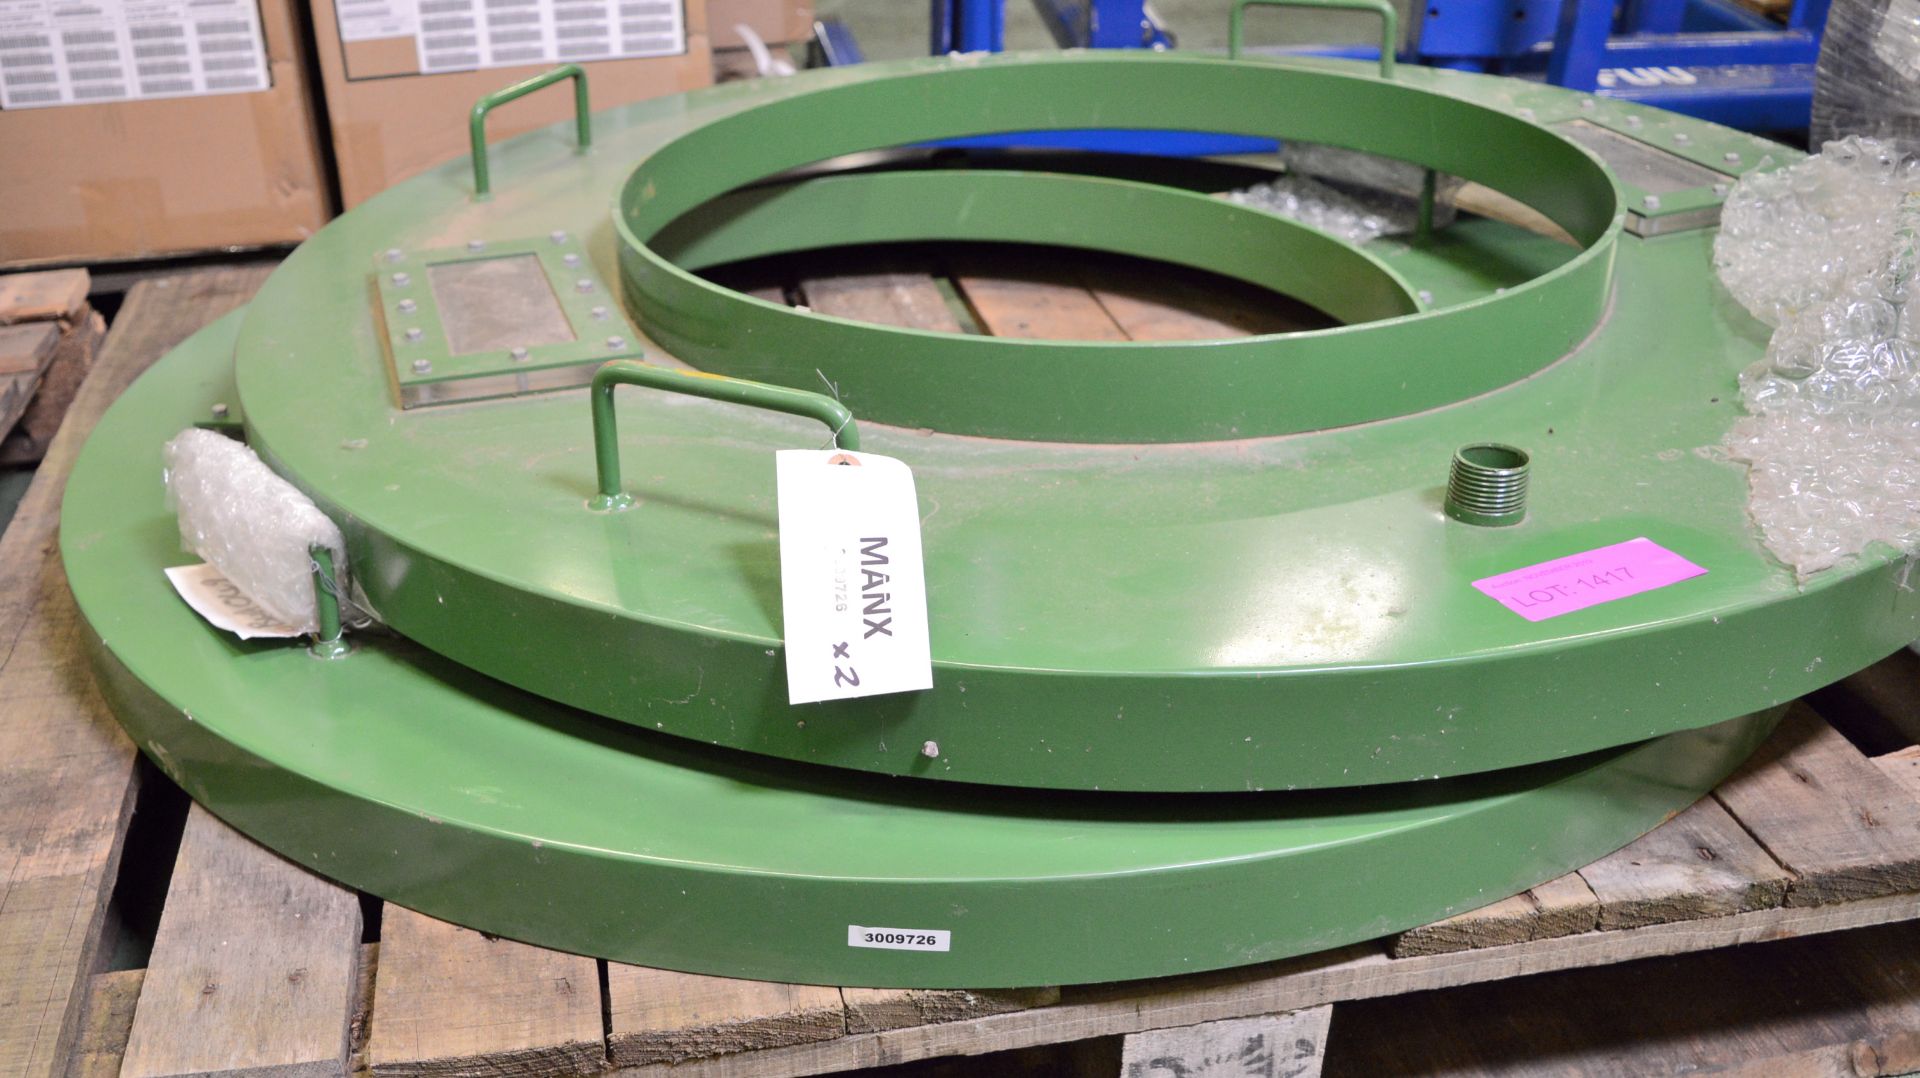 2x Cover Plate 1400mm Diameter. - Image 2 of 2